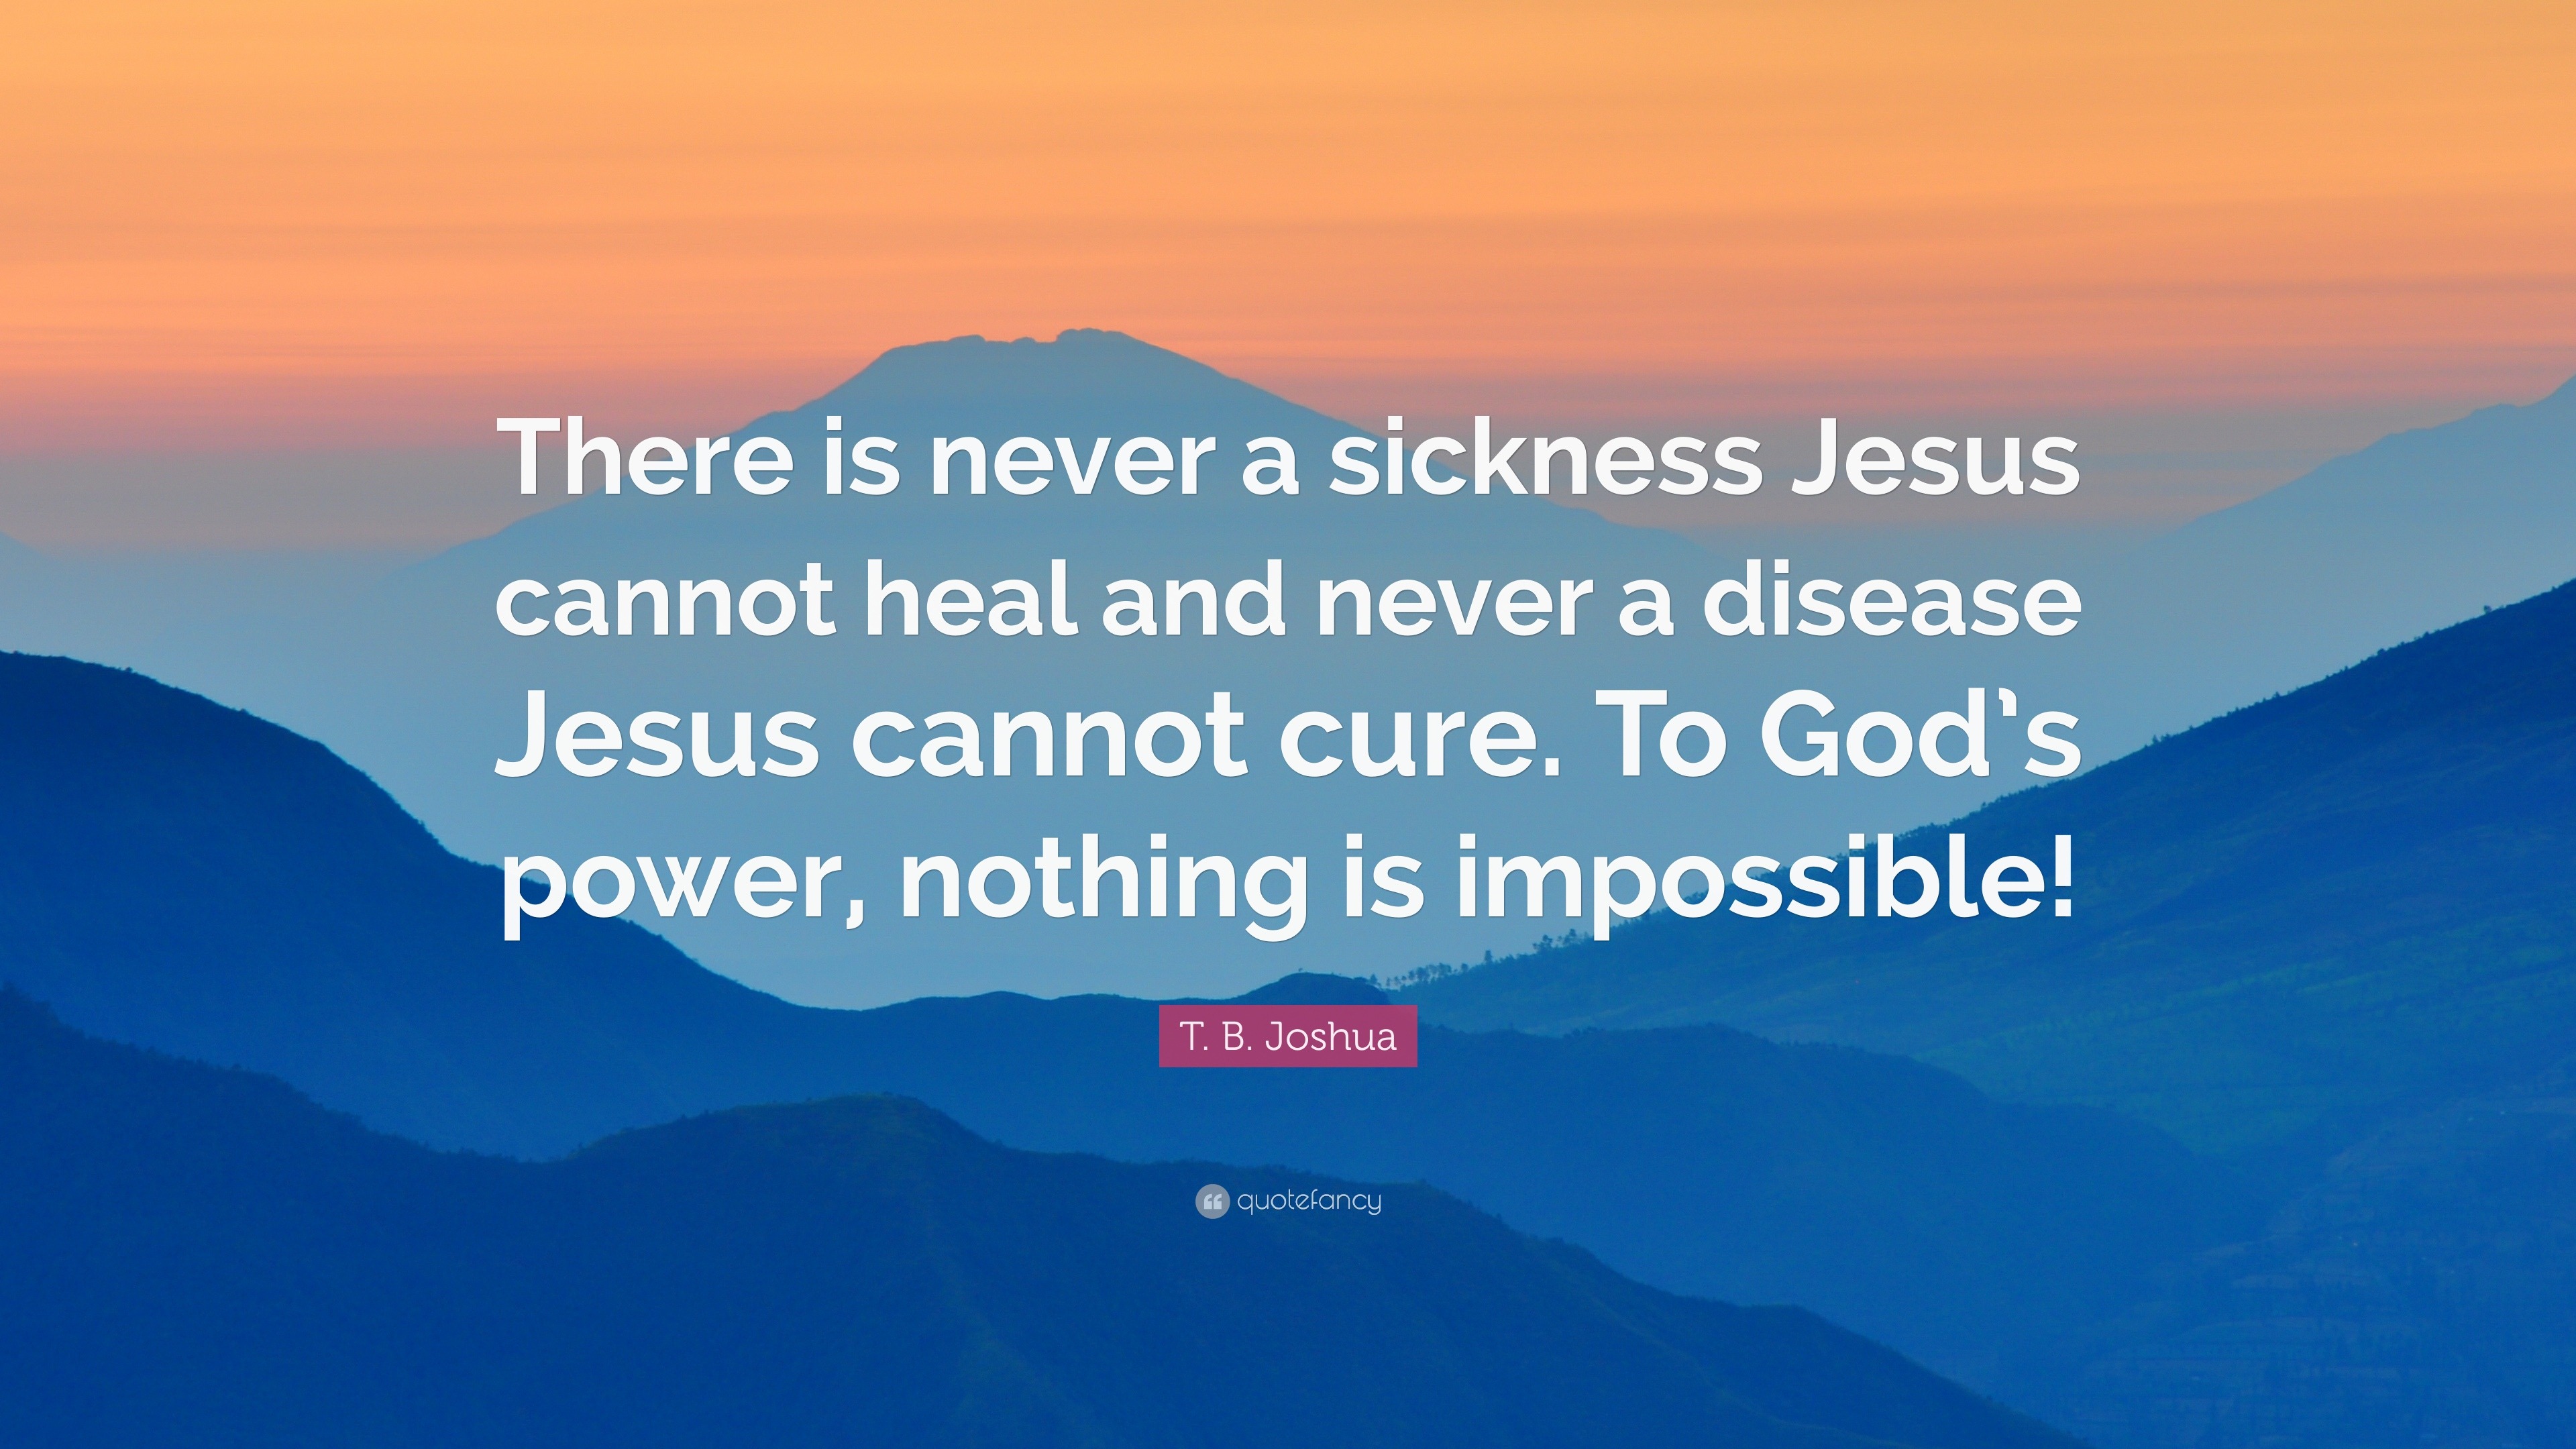 T B Joshua Quote There Is Never A Sickness Jesus Cannot Heal And Never A Disease Jesus Cannot Cure To God S Power Nothing Is Impossible